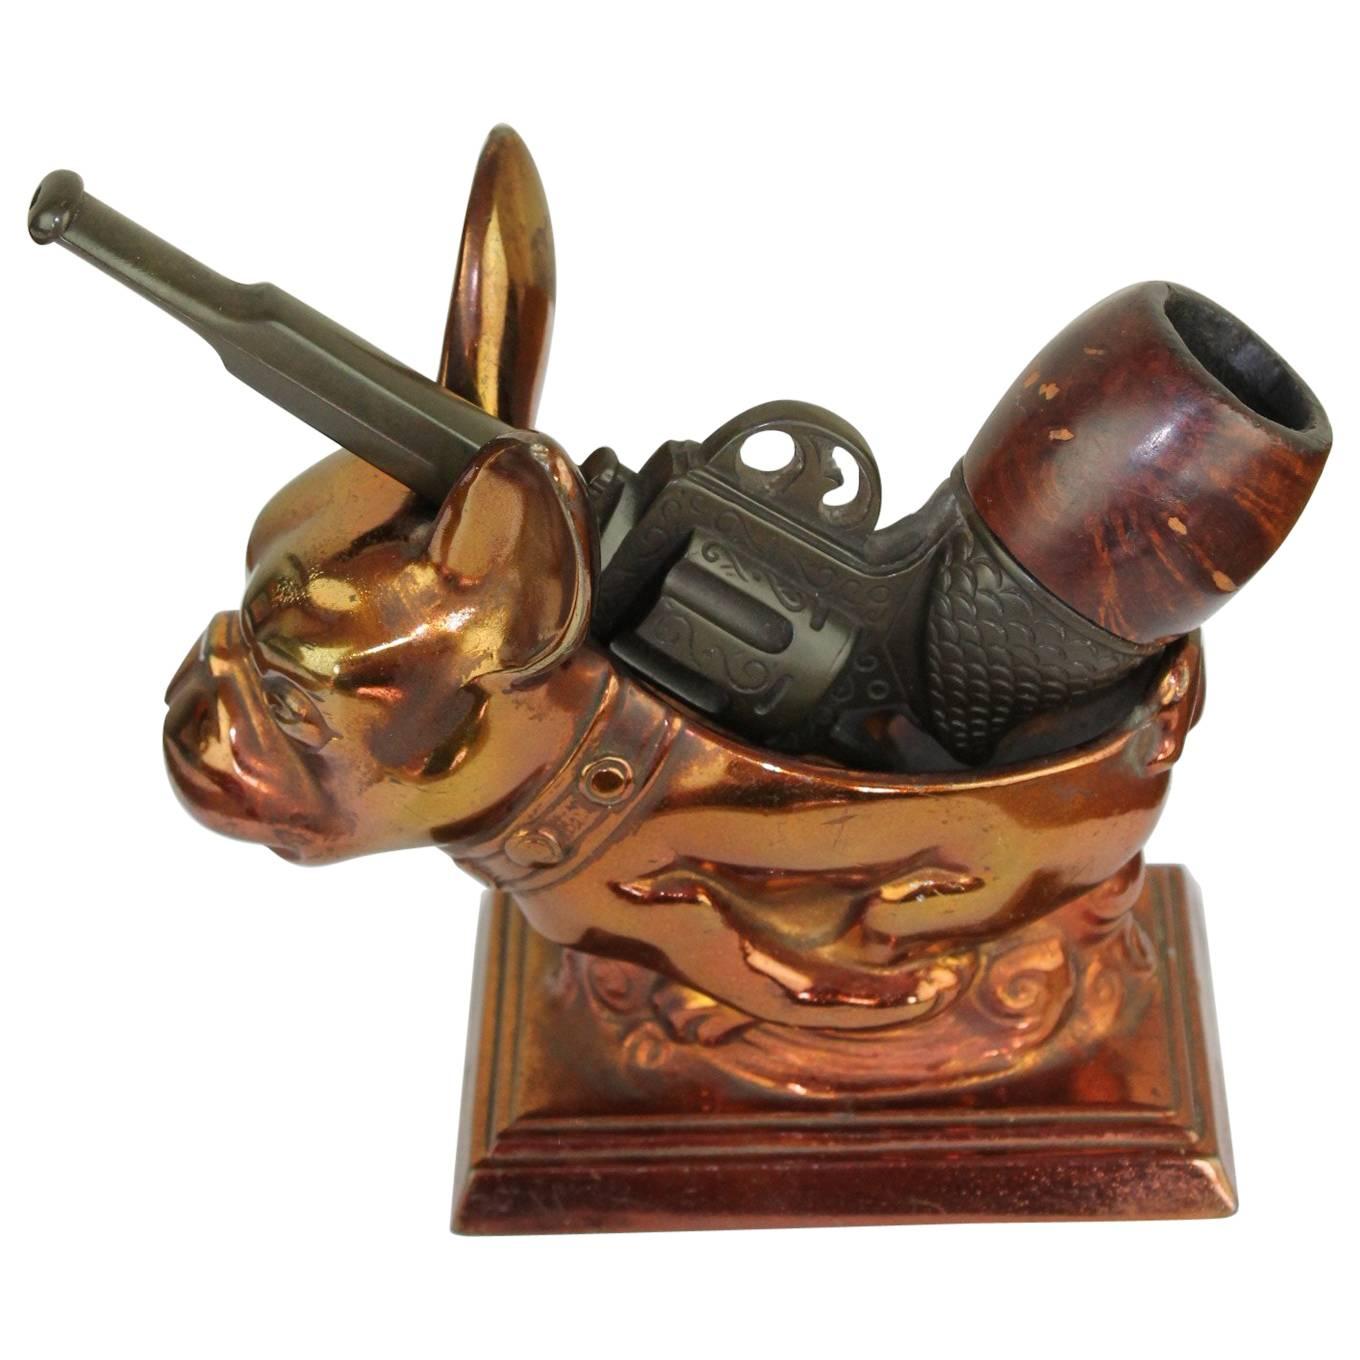  Vintage French Smoking Gun Pipe with Removable Bowl 